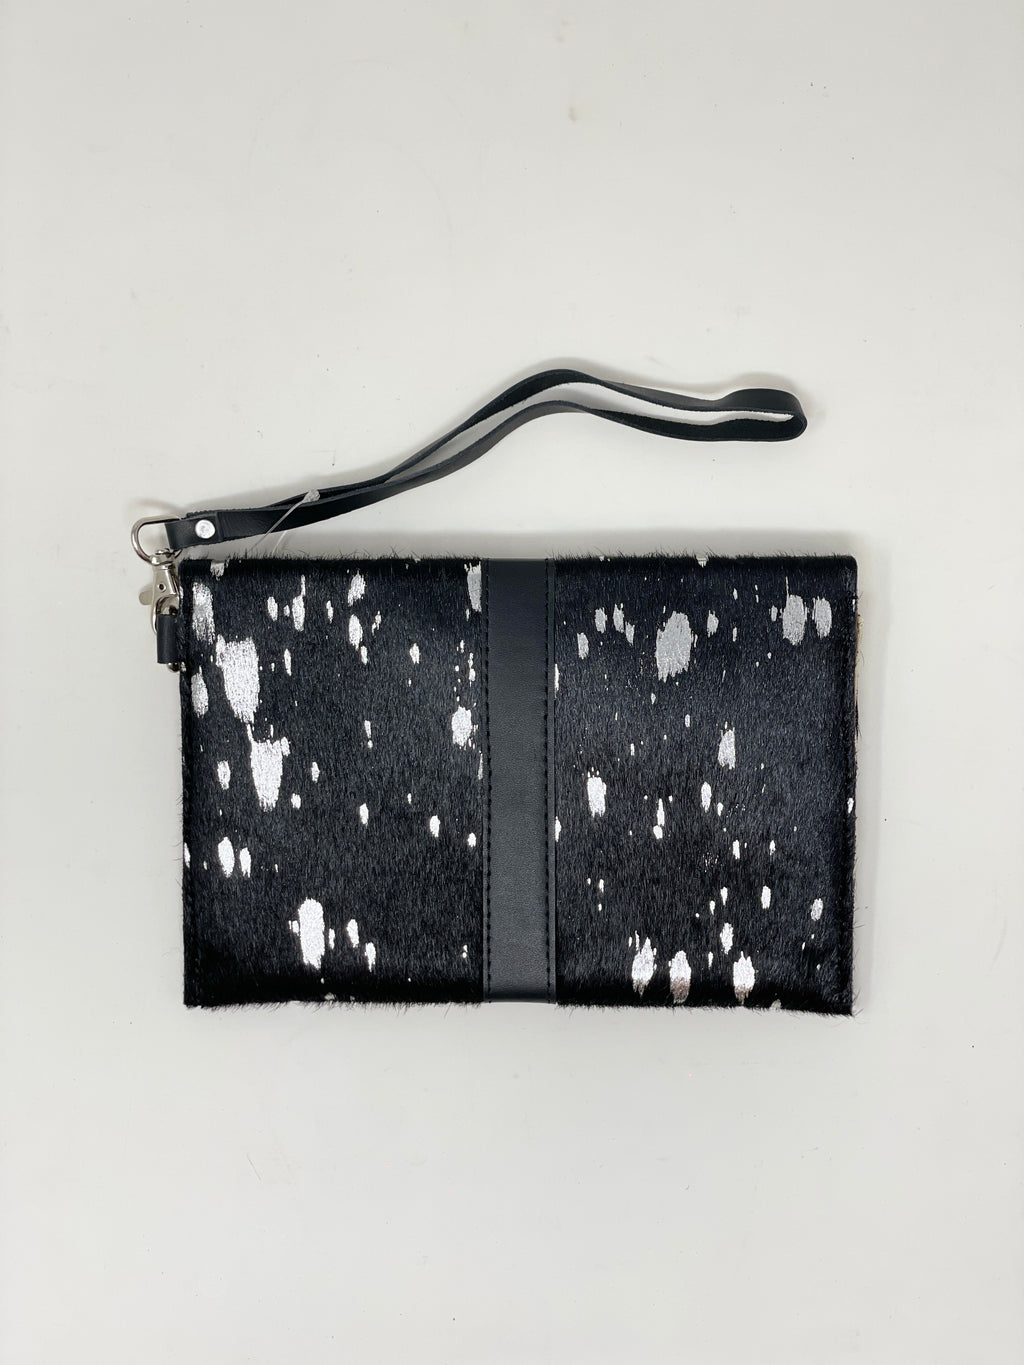 Black and Silver Genuine Leather Flap Front Wristlet